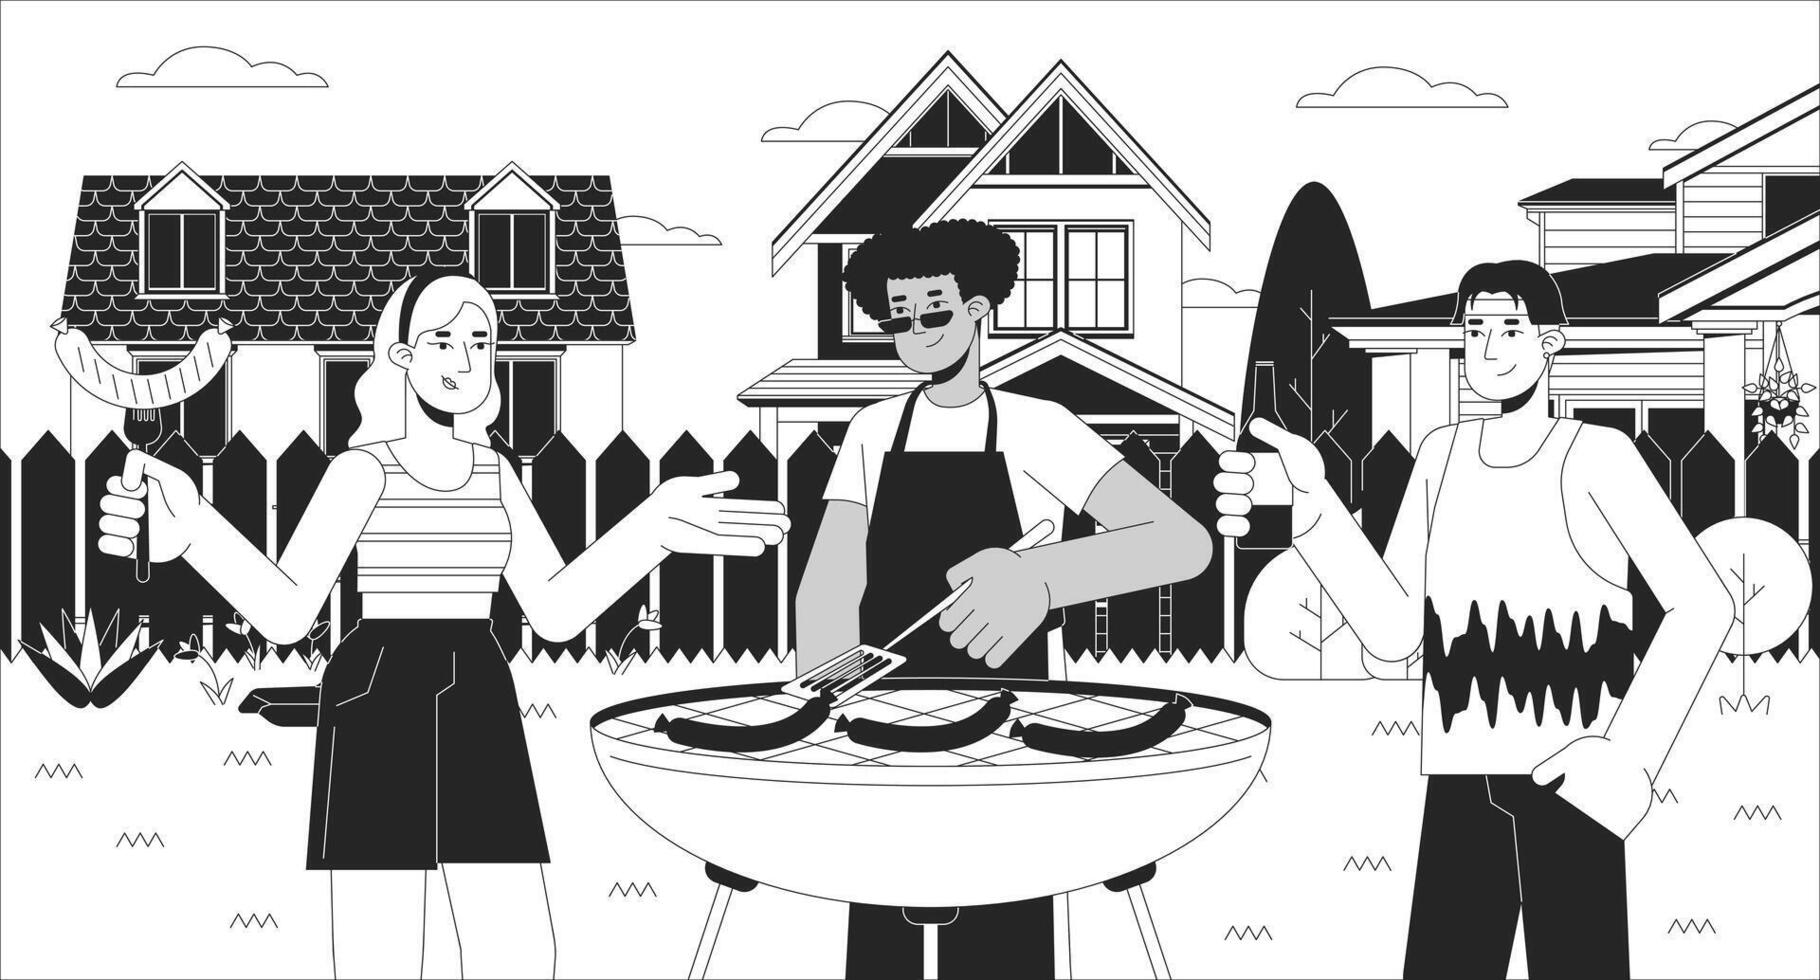 Barbeque with neighbors black and white line illustration. Positive friends grilling sausages on brazier 2D characters monochrome background. Weekend outdoor cooking party outline scene vector image